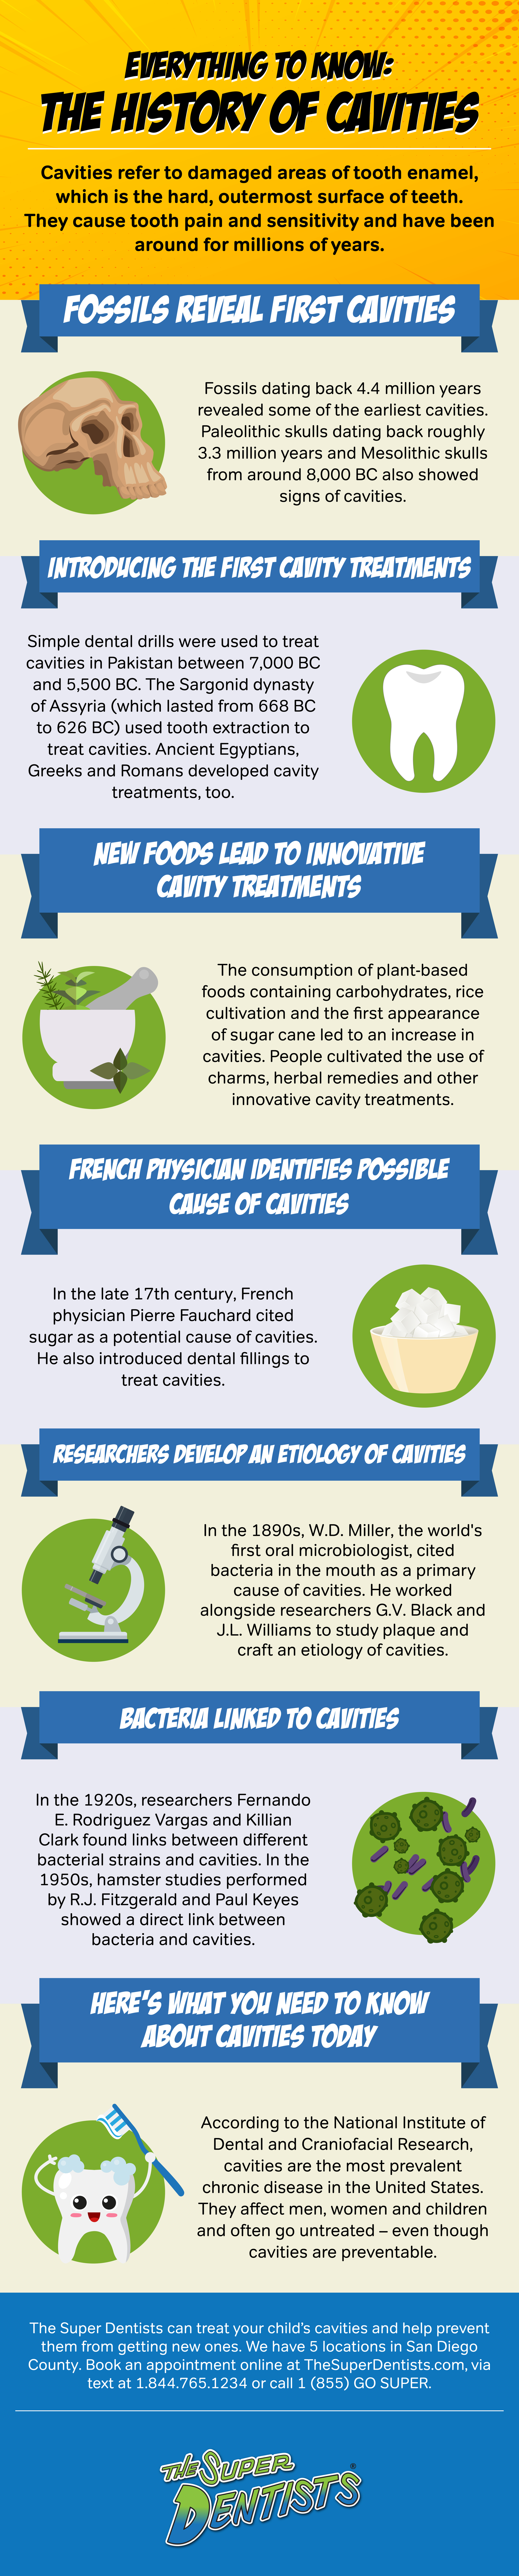 The History of Cavities